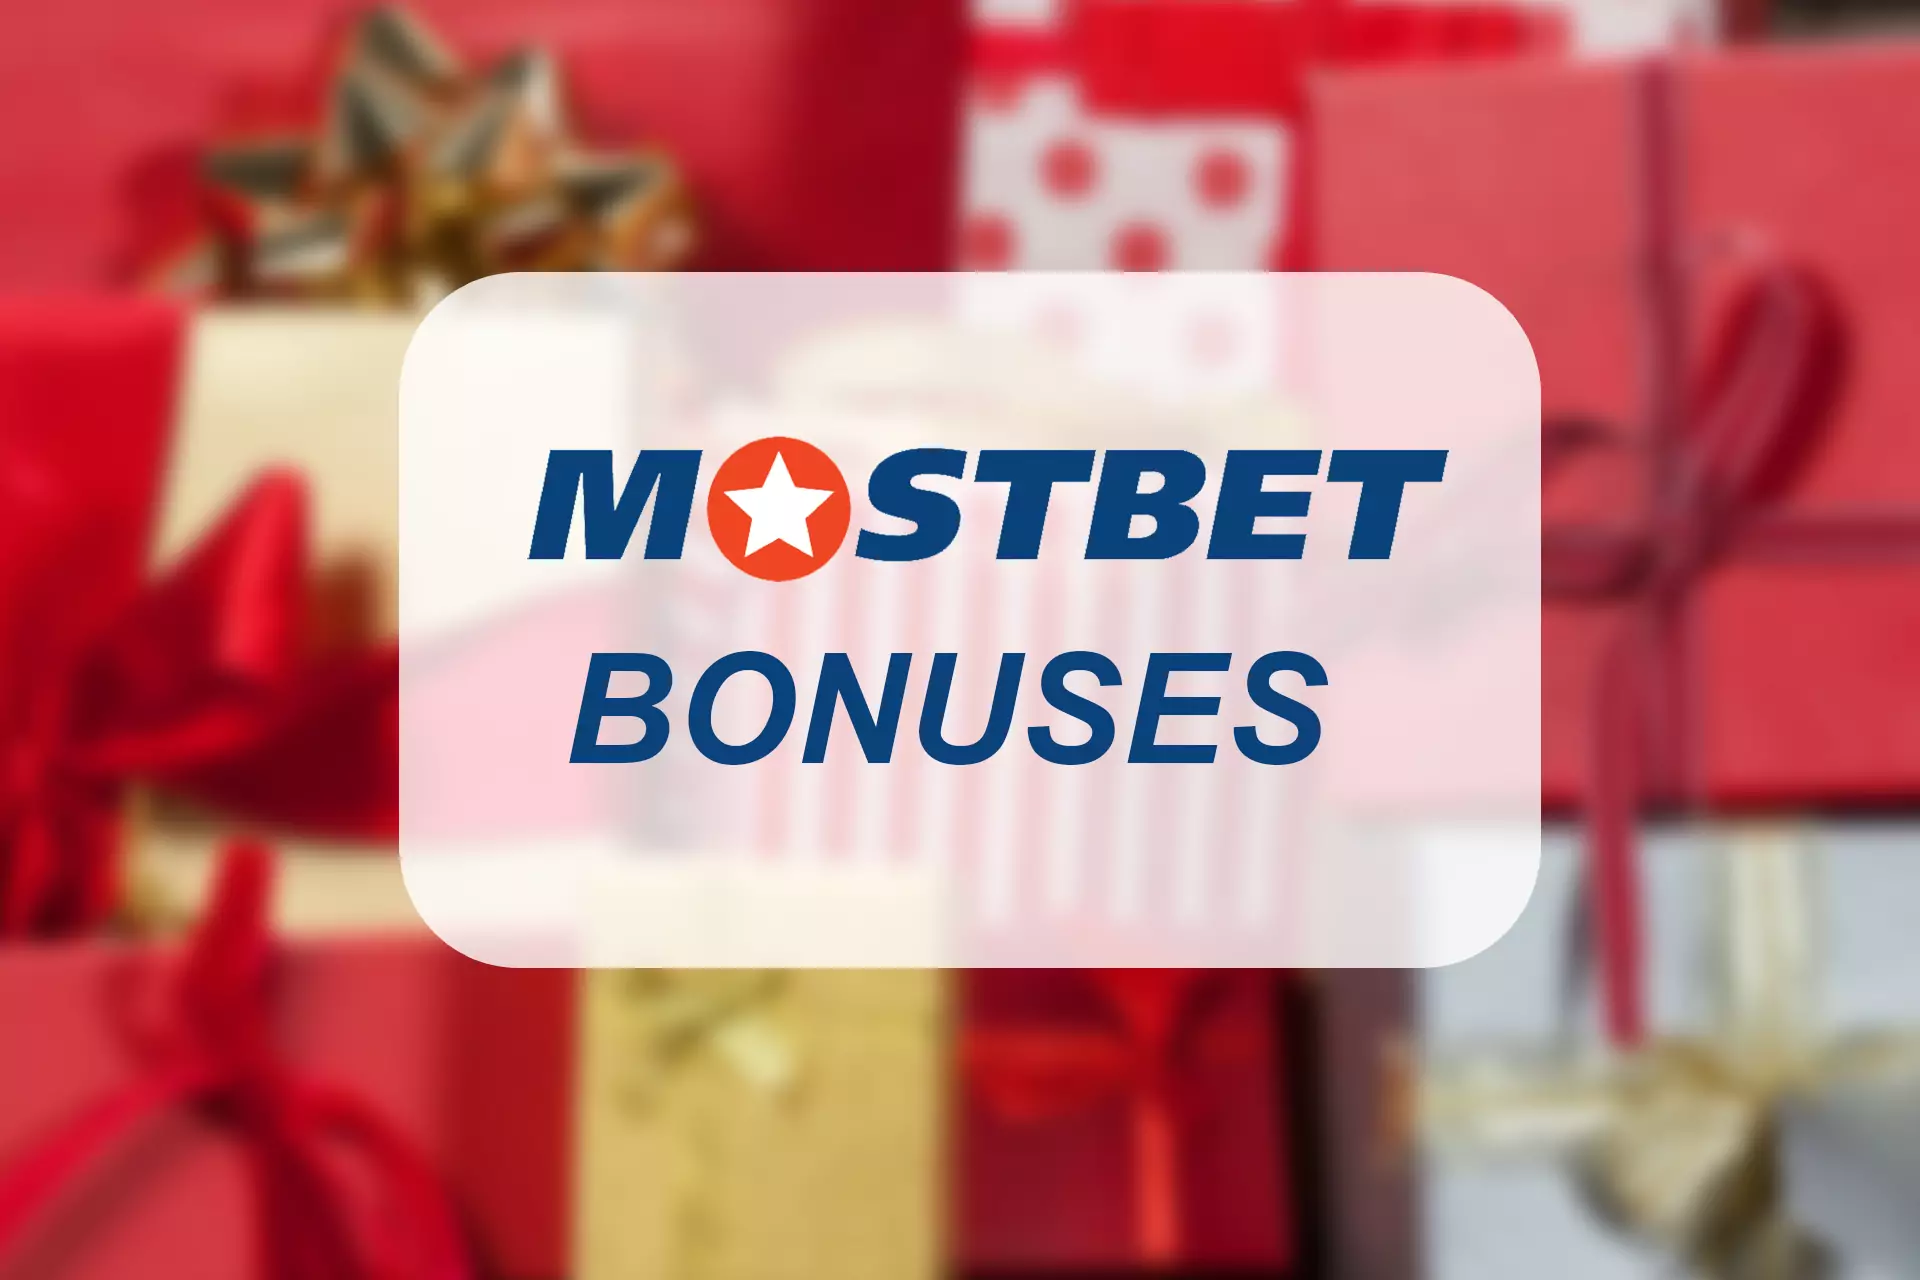 Top up your Mostbet account to get the first deposit bonus.